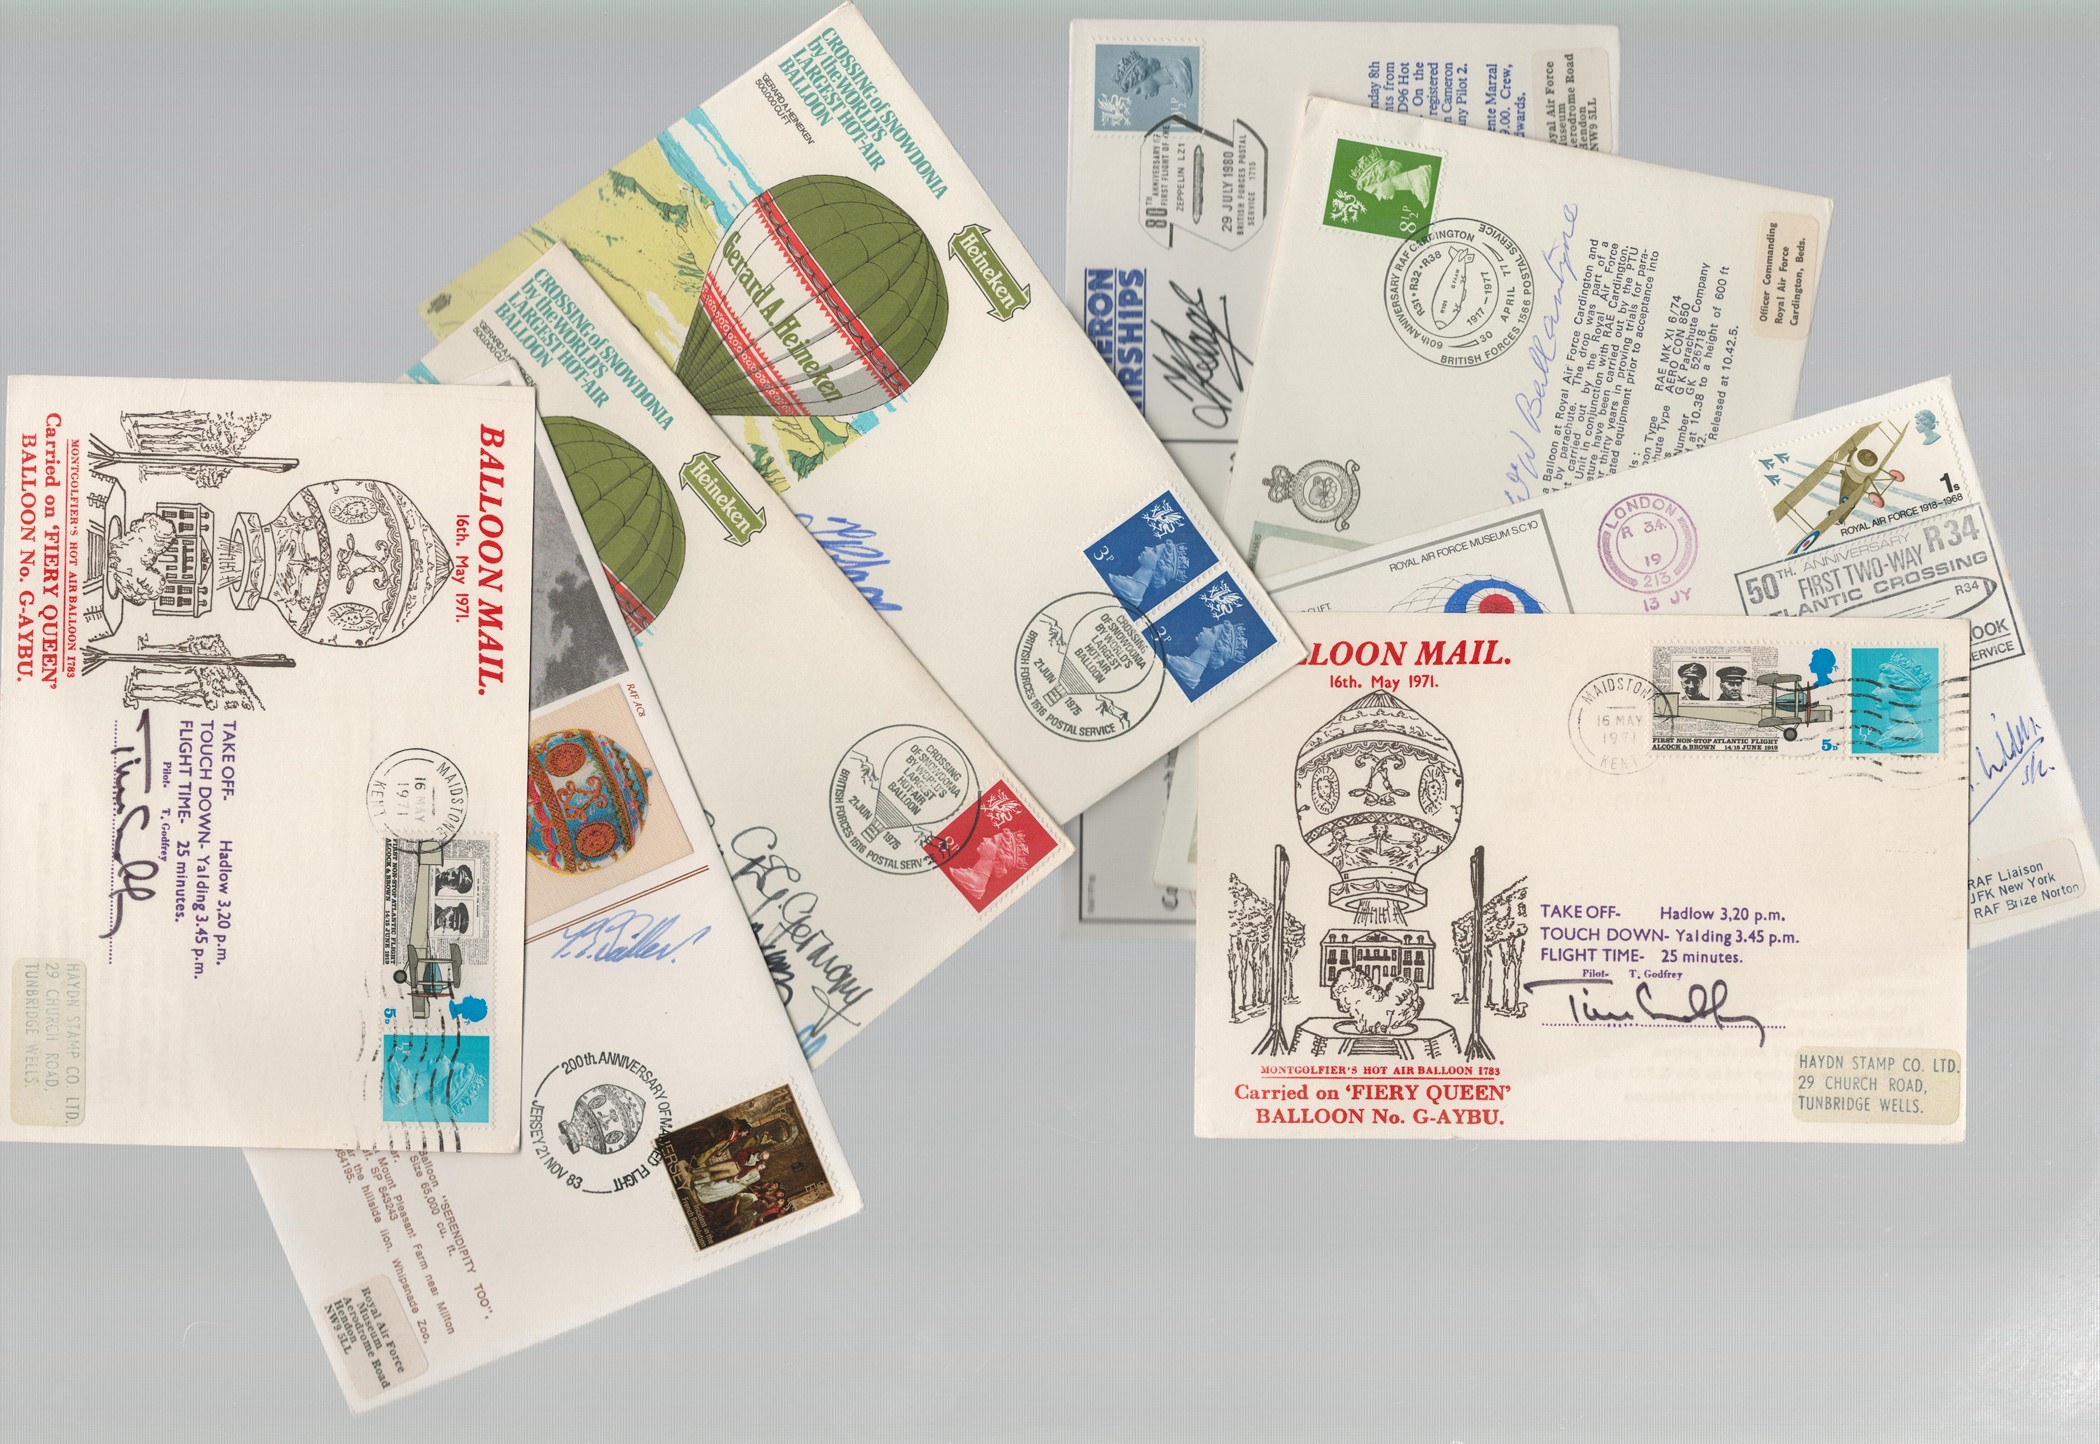 Air Balloons Collection of 16 FDCs signatures include T Godfrey, Tony Gowin Jones, W W Ballantyne,